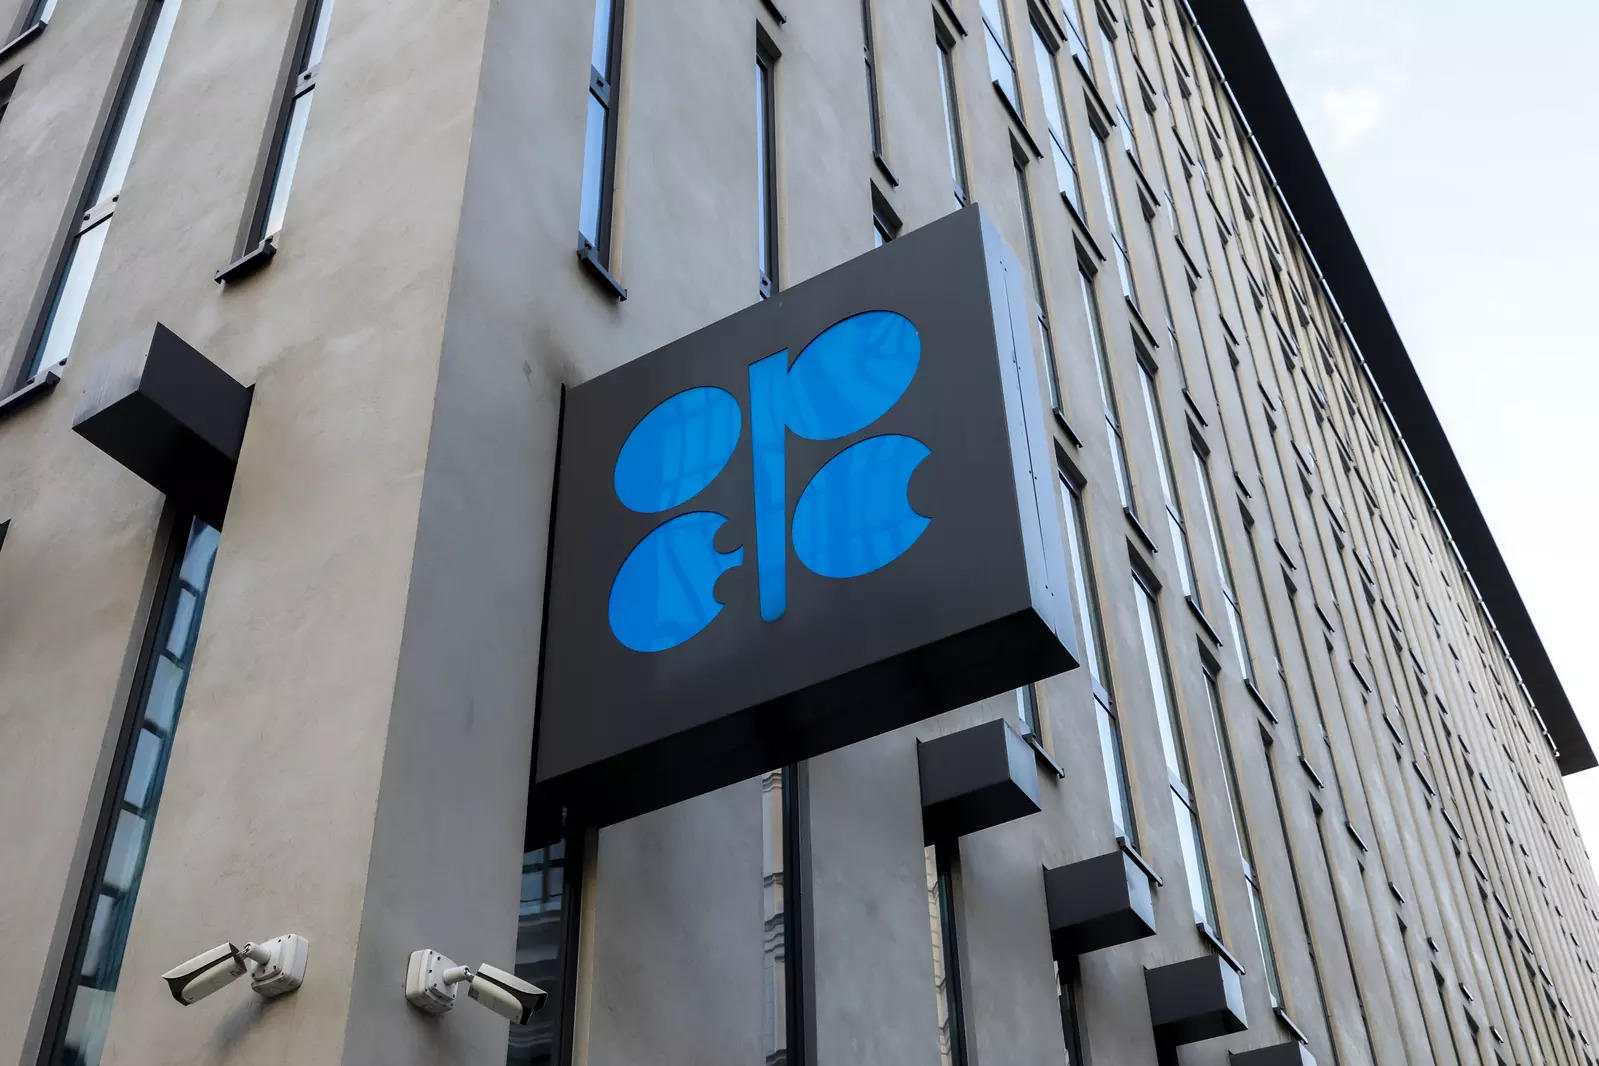 OPEC+ boosts oil output by slower pace than previous months